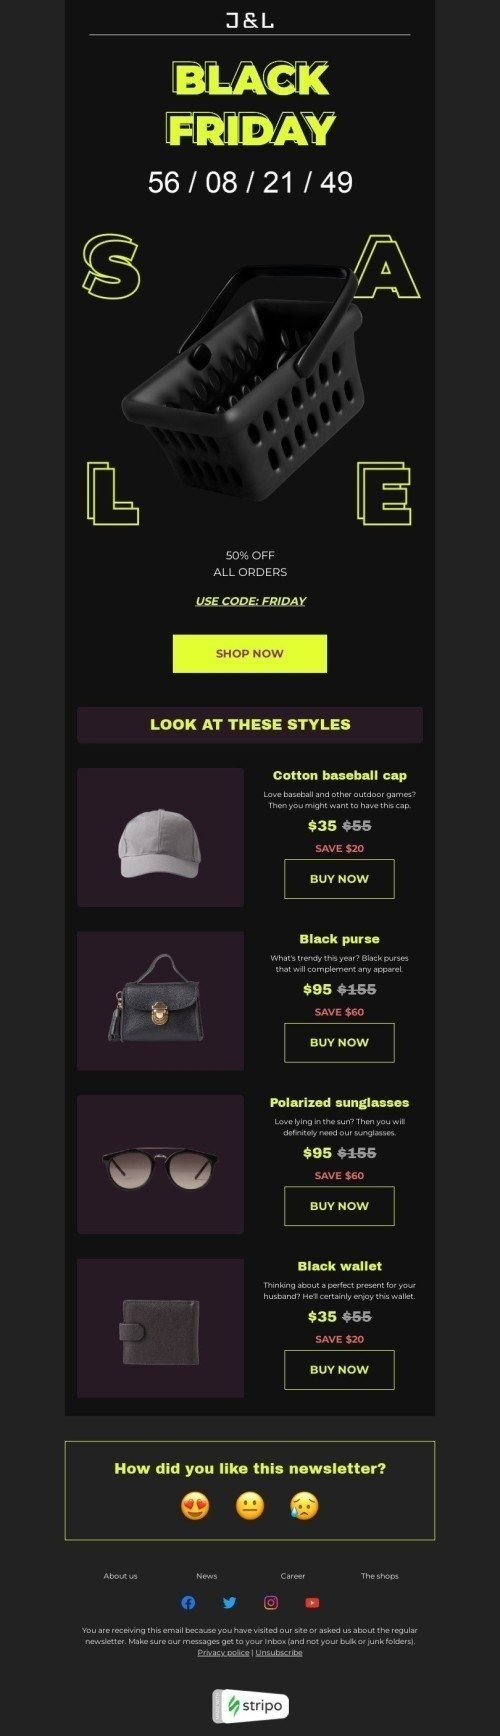 Black Friday Email Template "Look at these styles" for Fashion industry mobile view